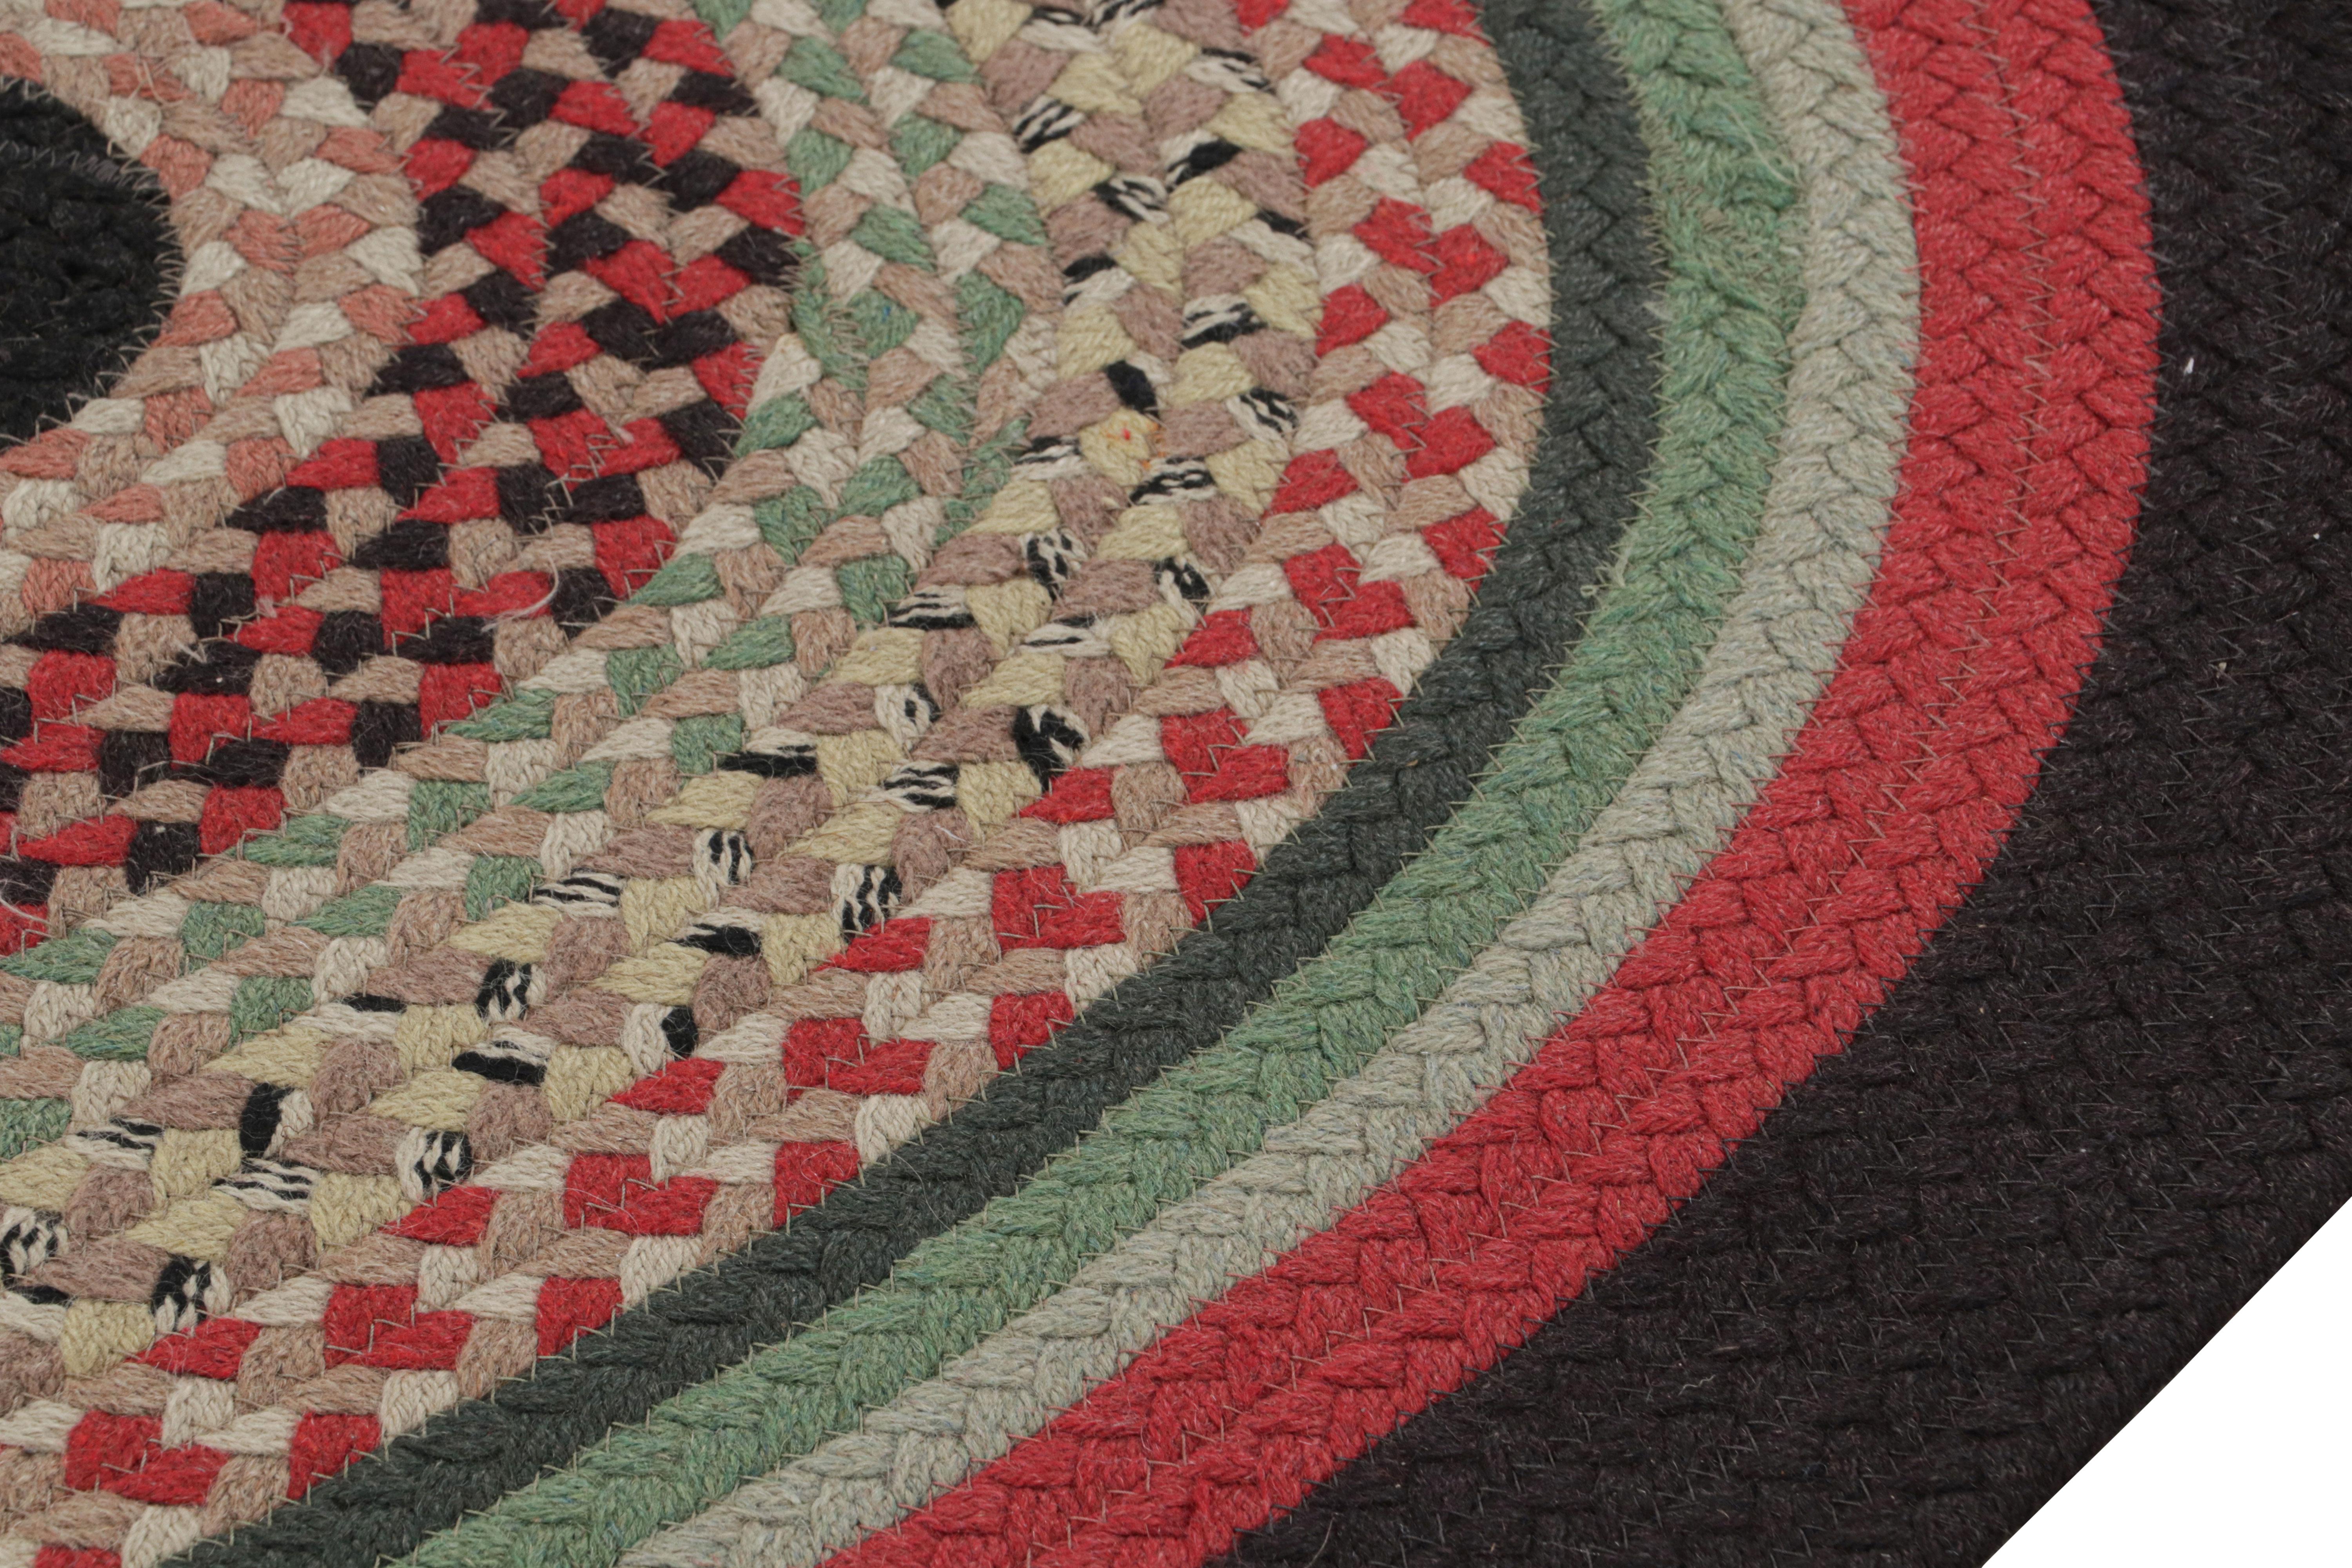 Early 20th Century Antique Hooked Oval Rug with Polychromatic Braided Stripes, from Rug & Kilim